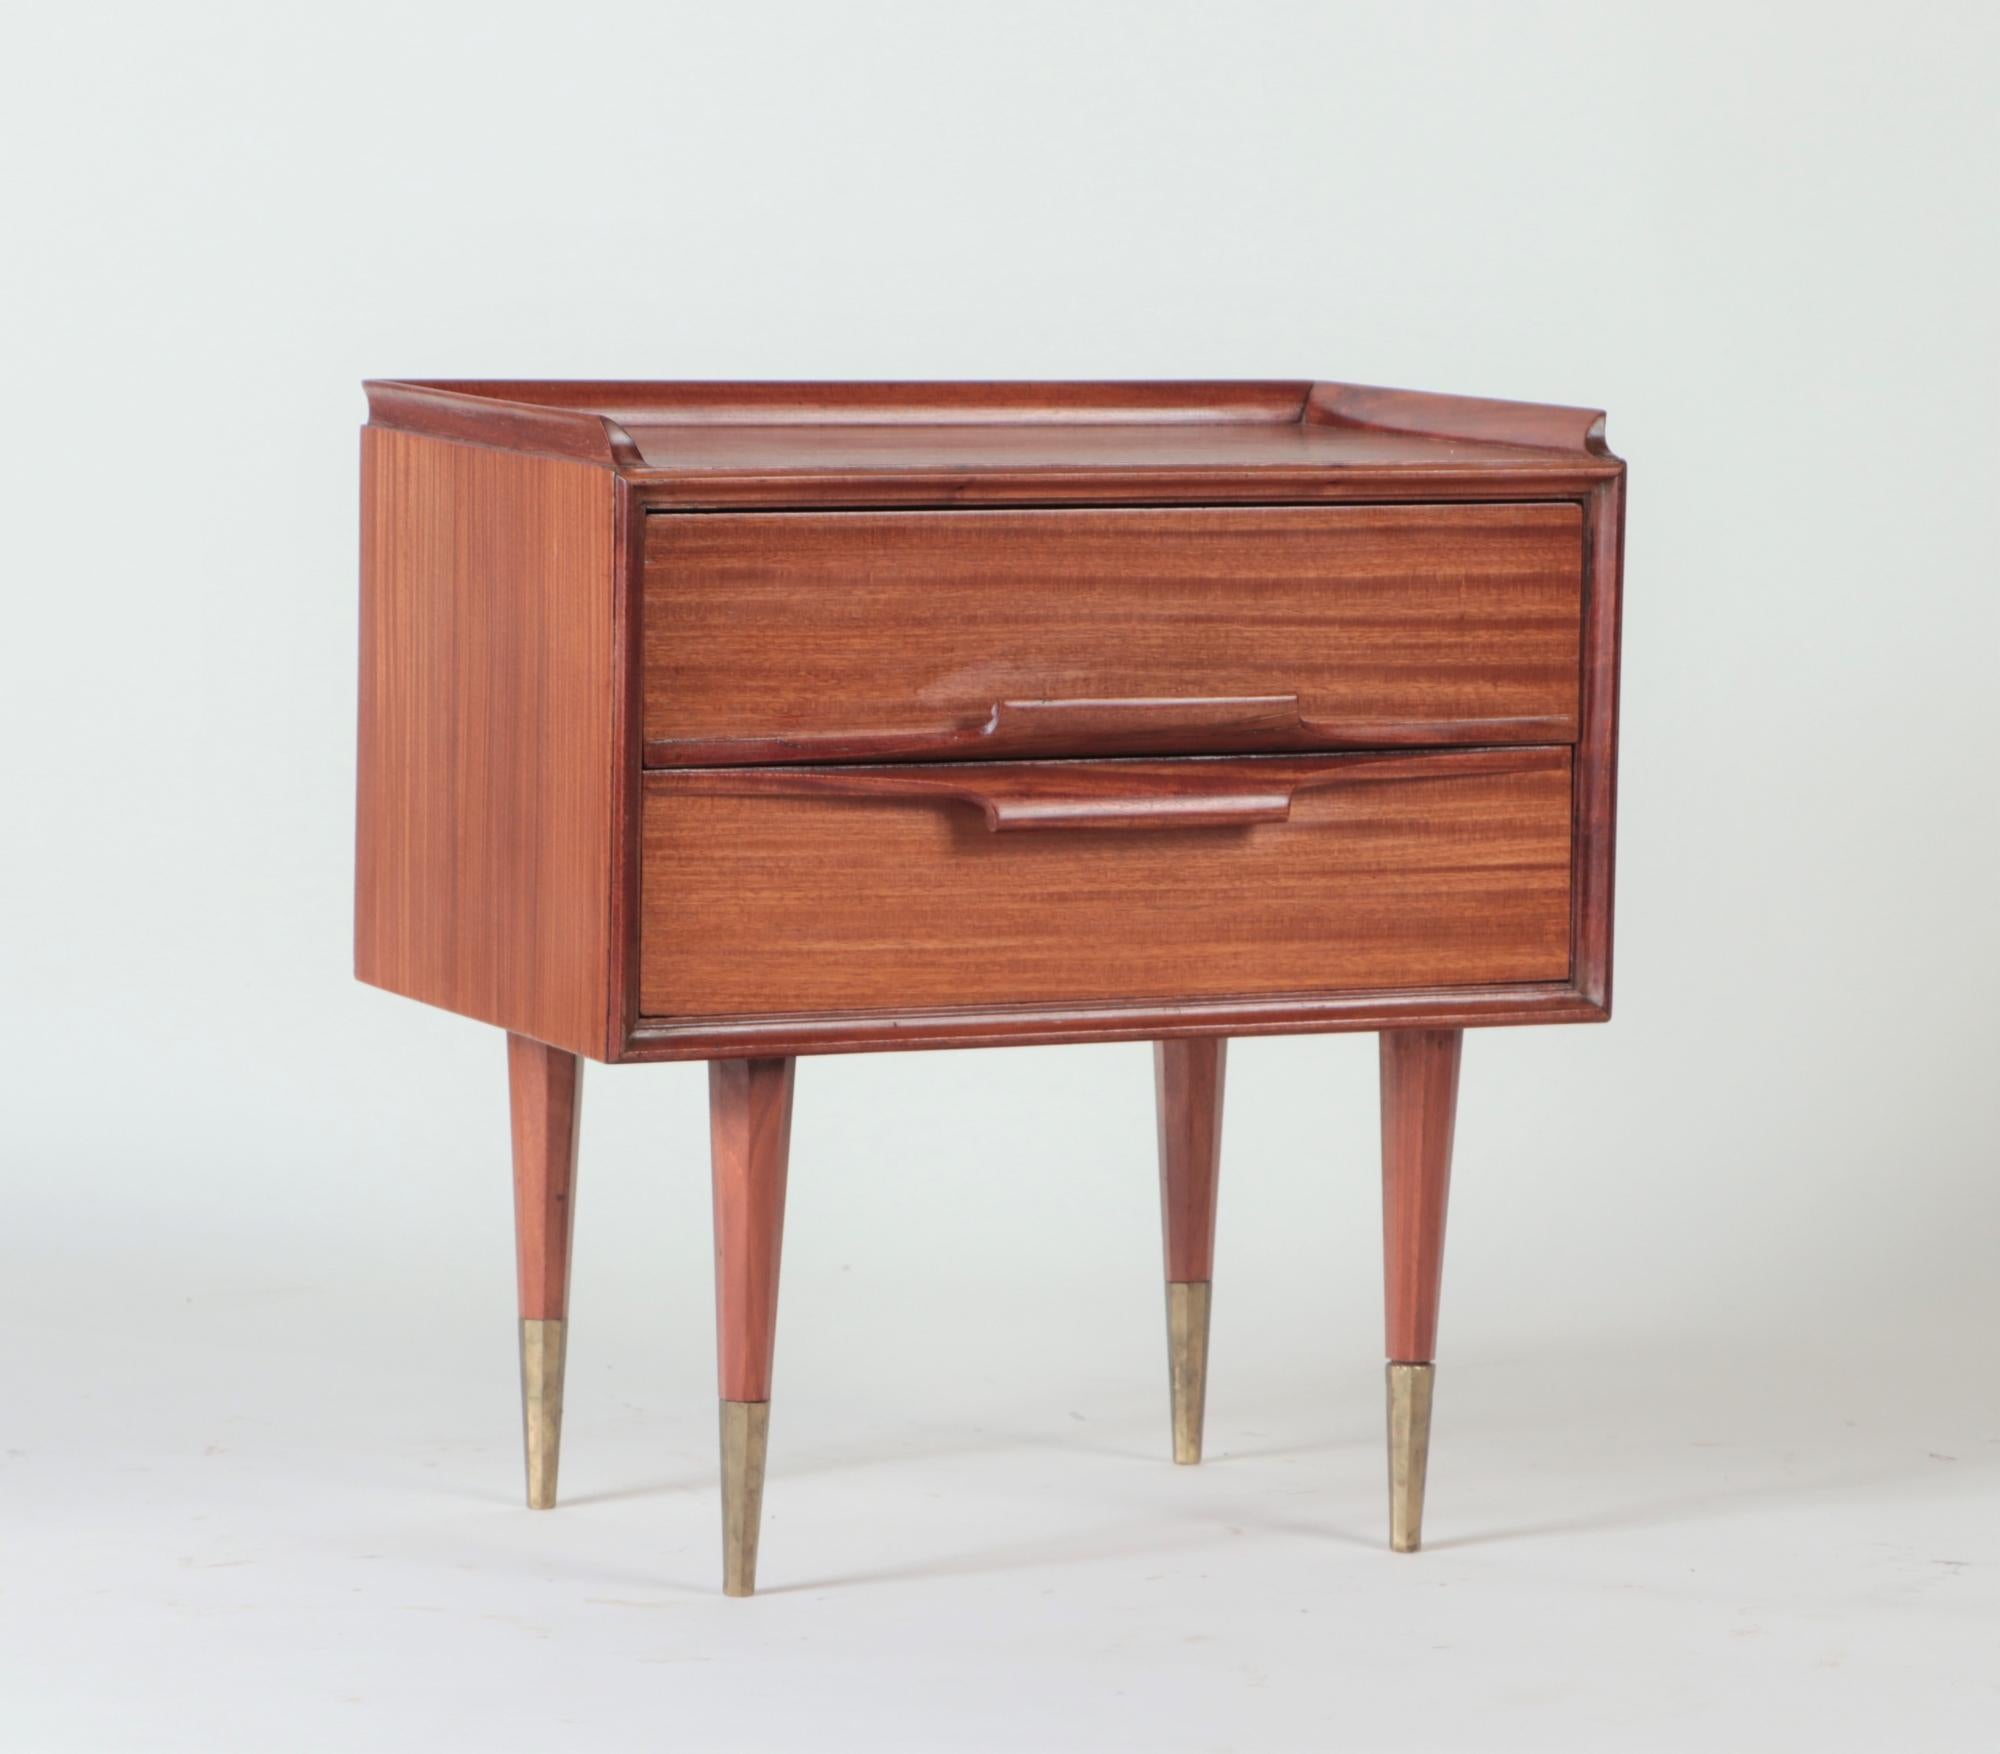 A pair of Mid-Century Modern Italian mahogany two drawers night stands resting on four tapered legs ending in brass sabots circa 1950.